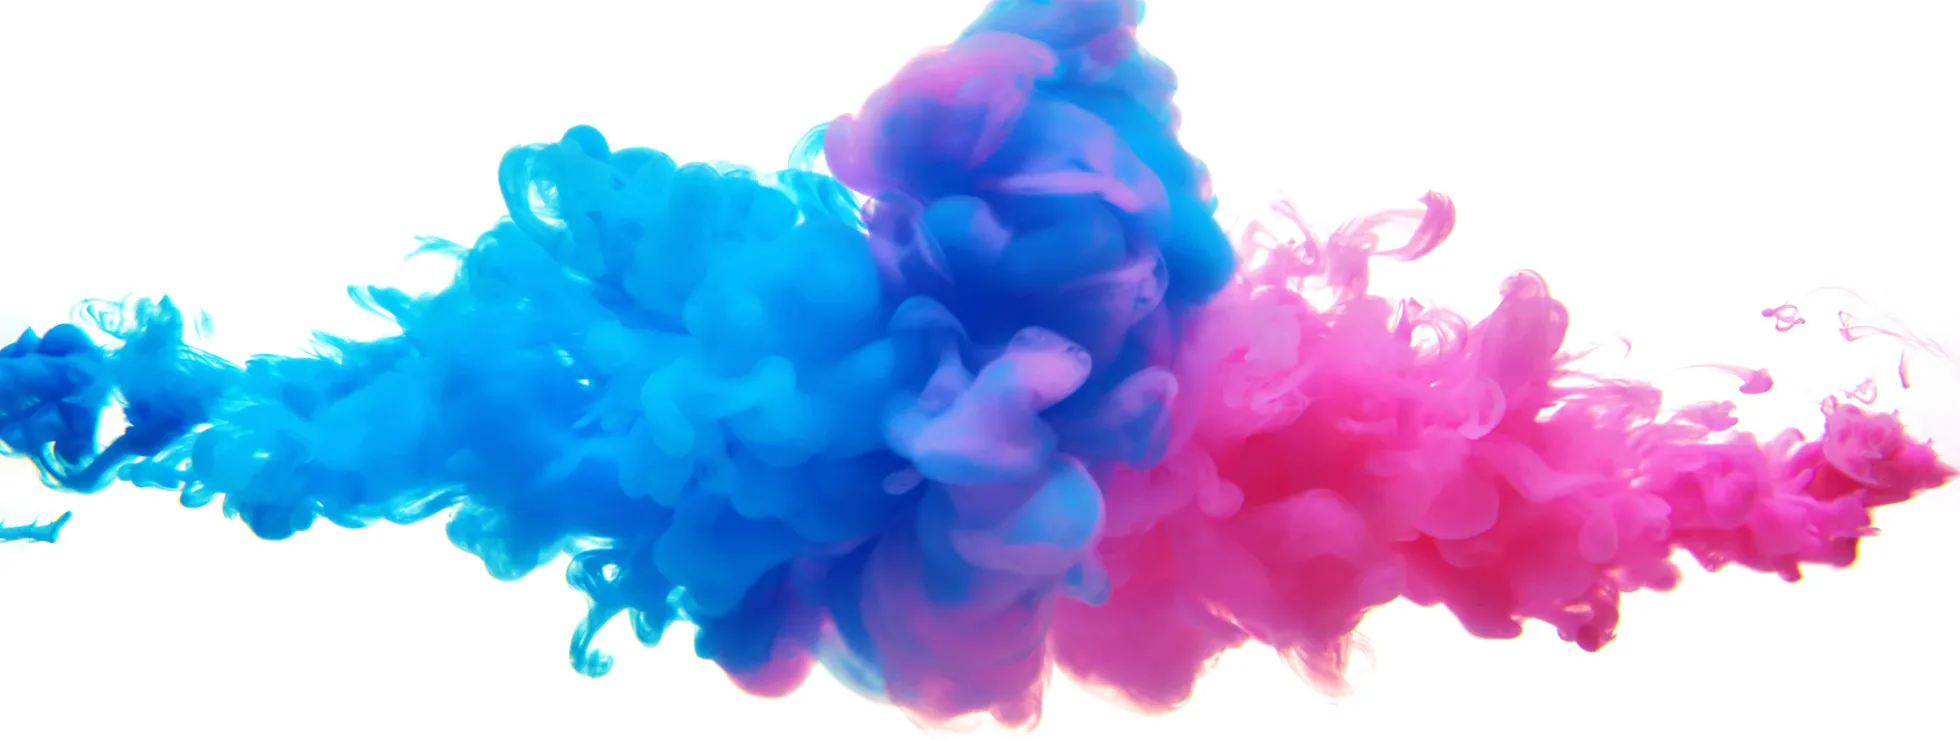 Multicolor liquid impact - blue and pink merge into a purple blend